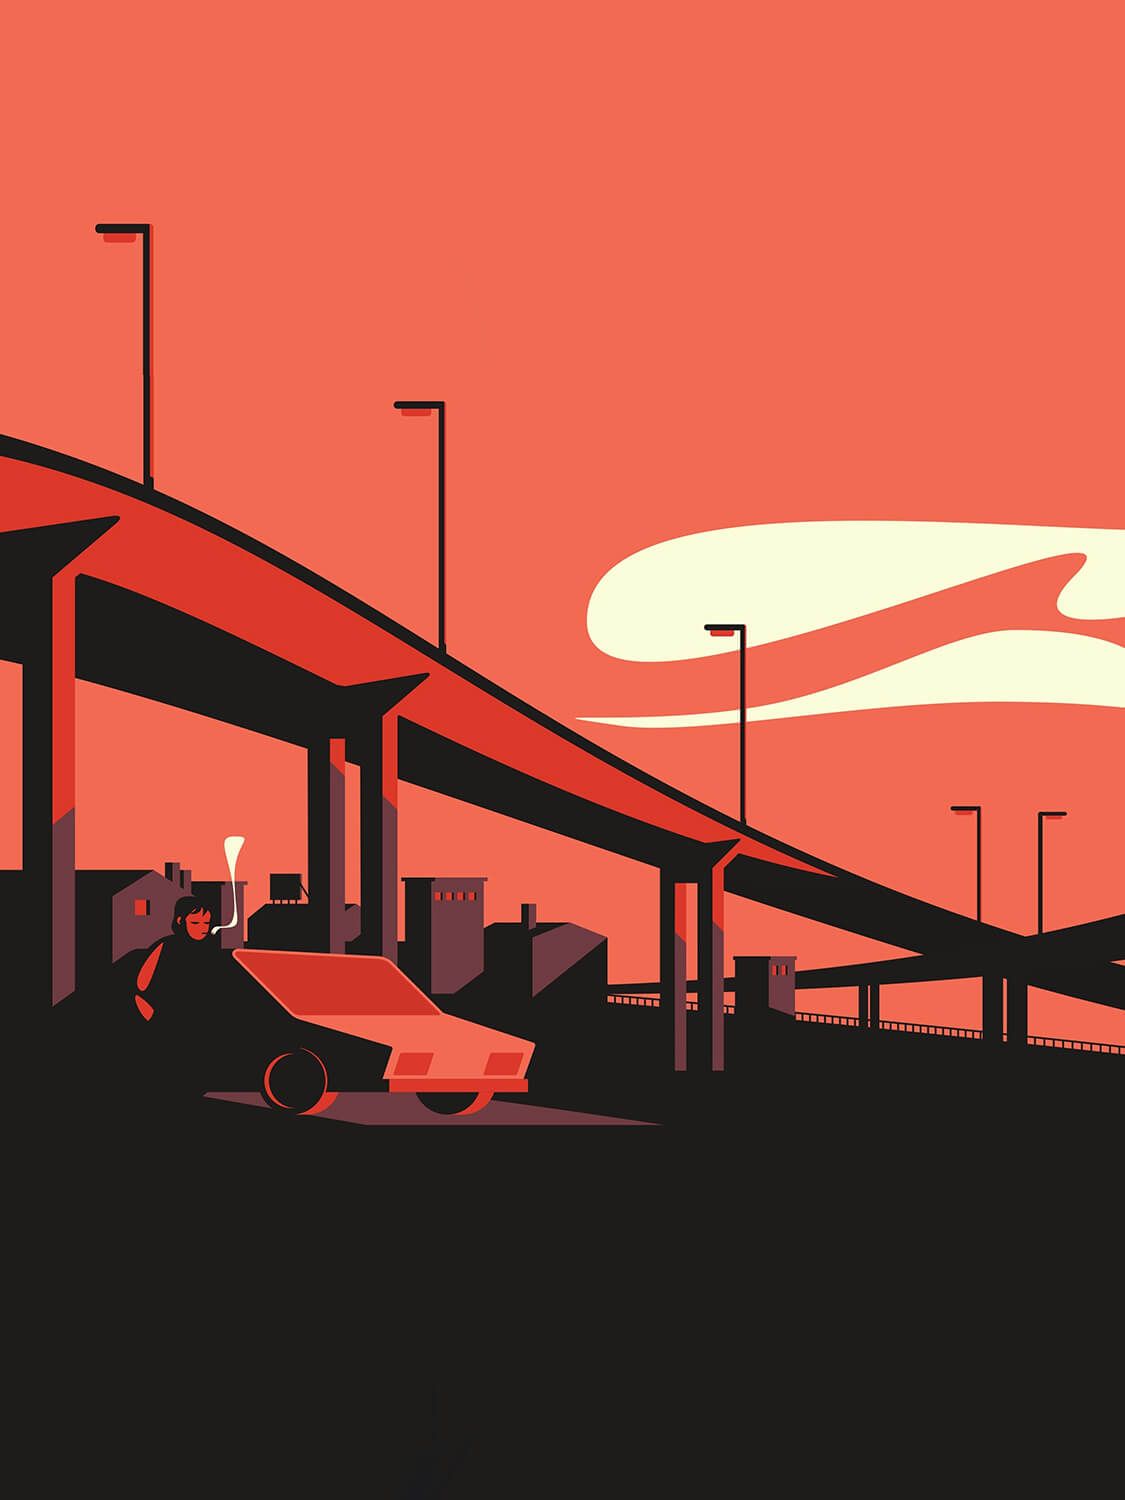 Stylized cityscape with overpasses and a car at dusk